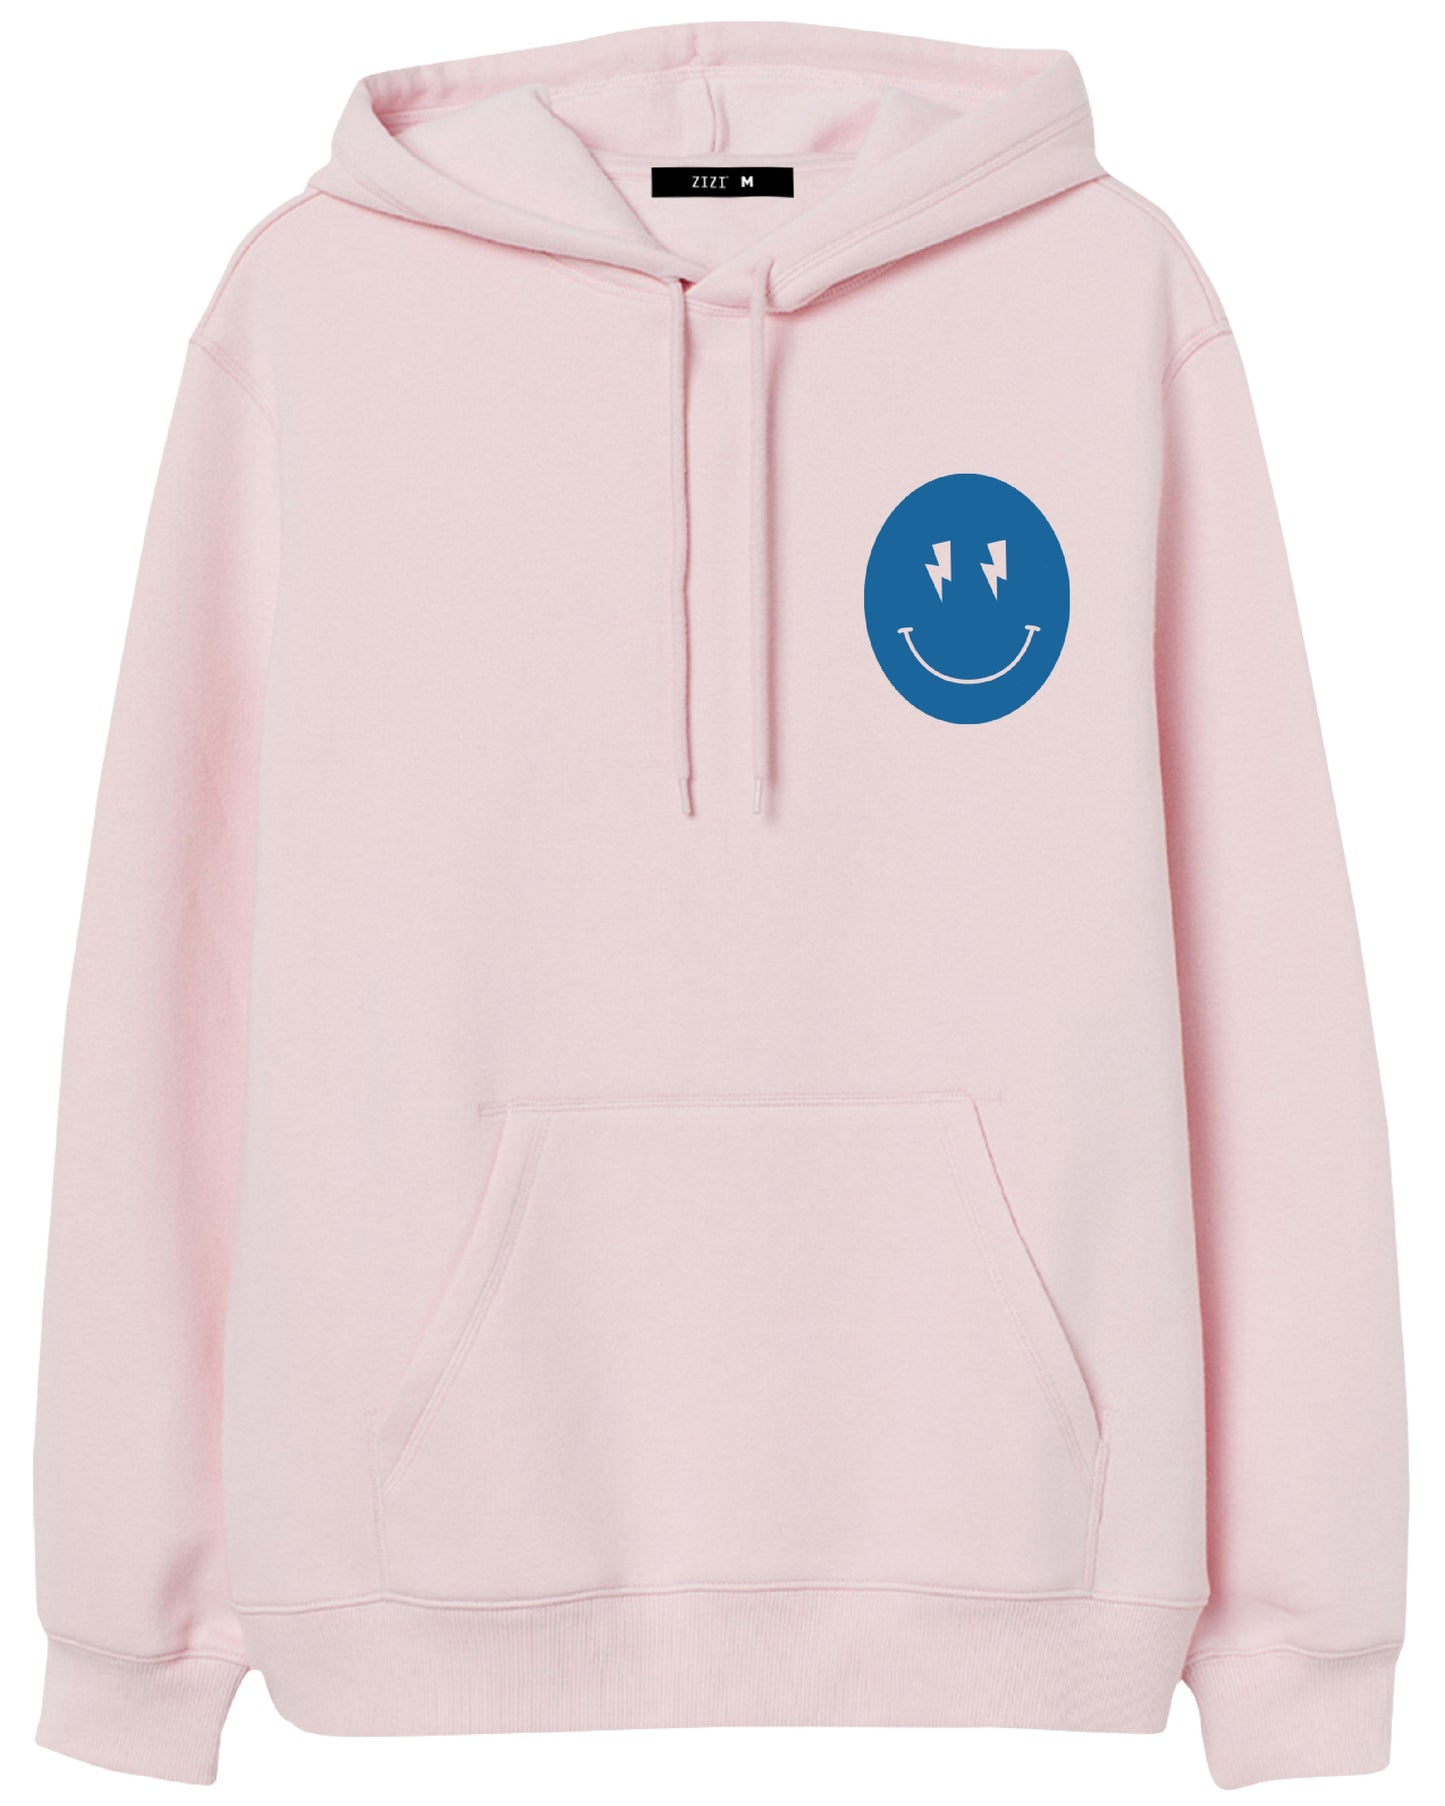 HOODIE ROSA YOU ARE MY PERSON